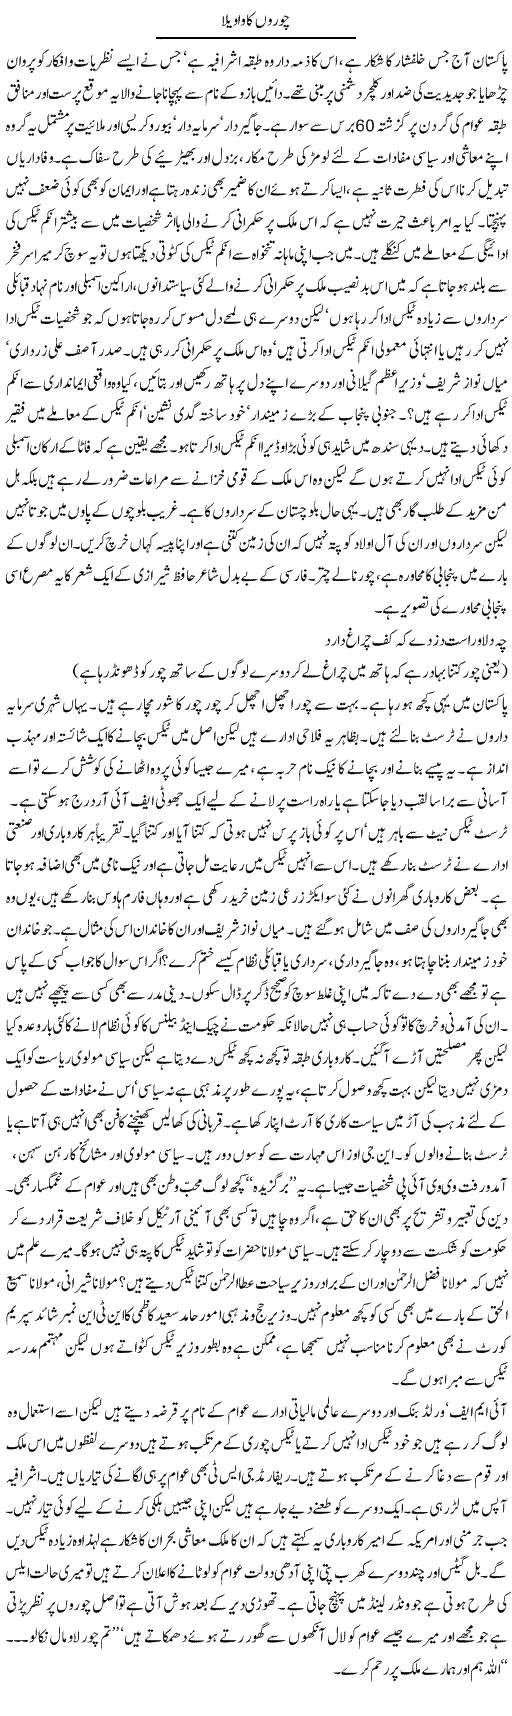 The Thieves Express Column Latif Chaudhry 12 December 2010